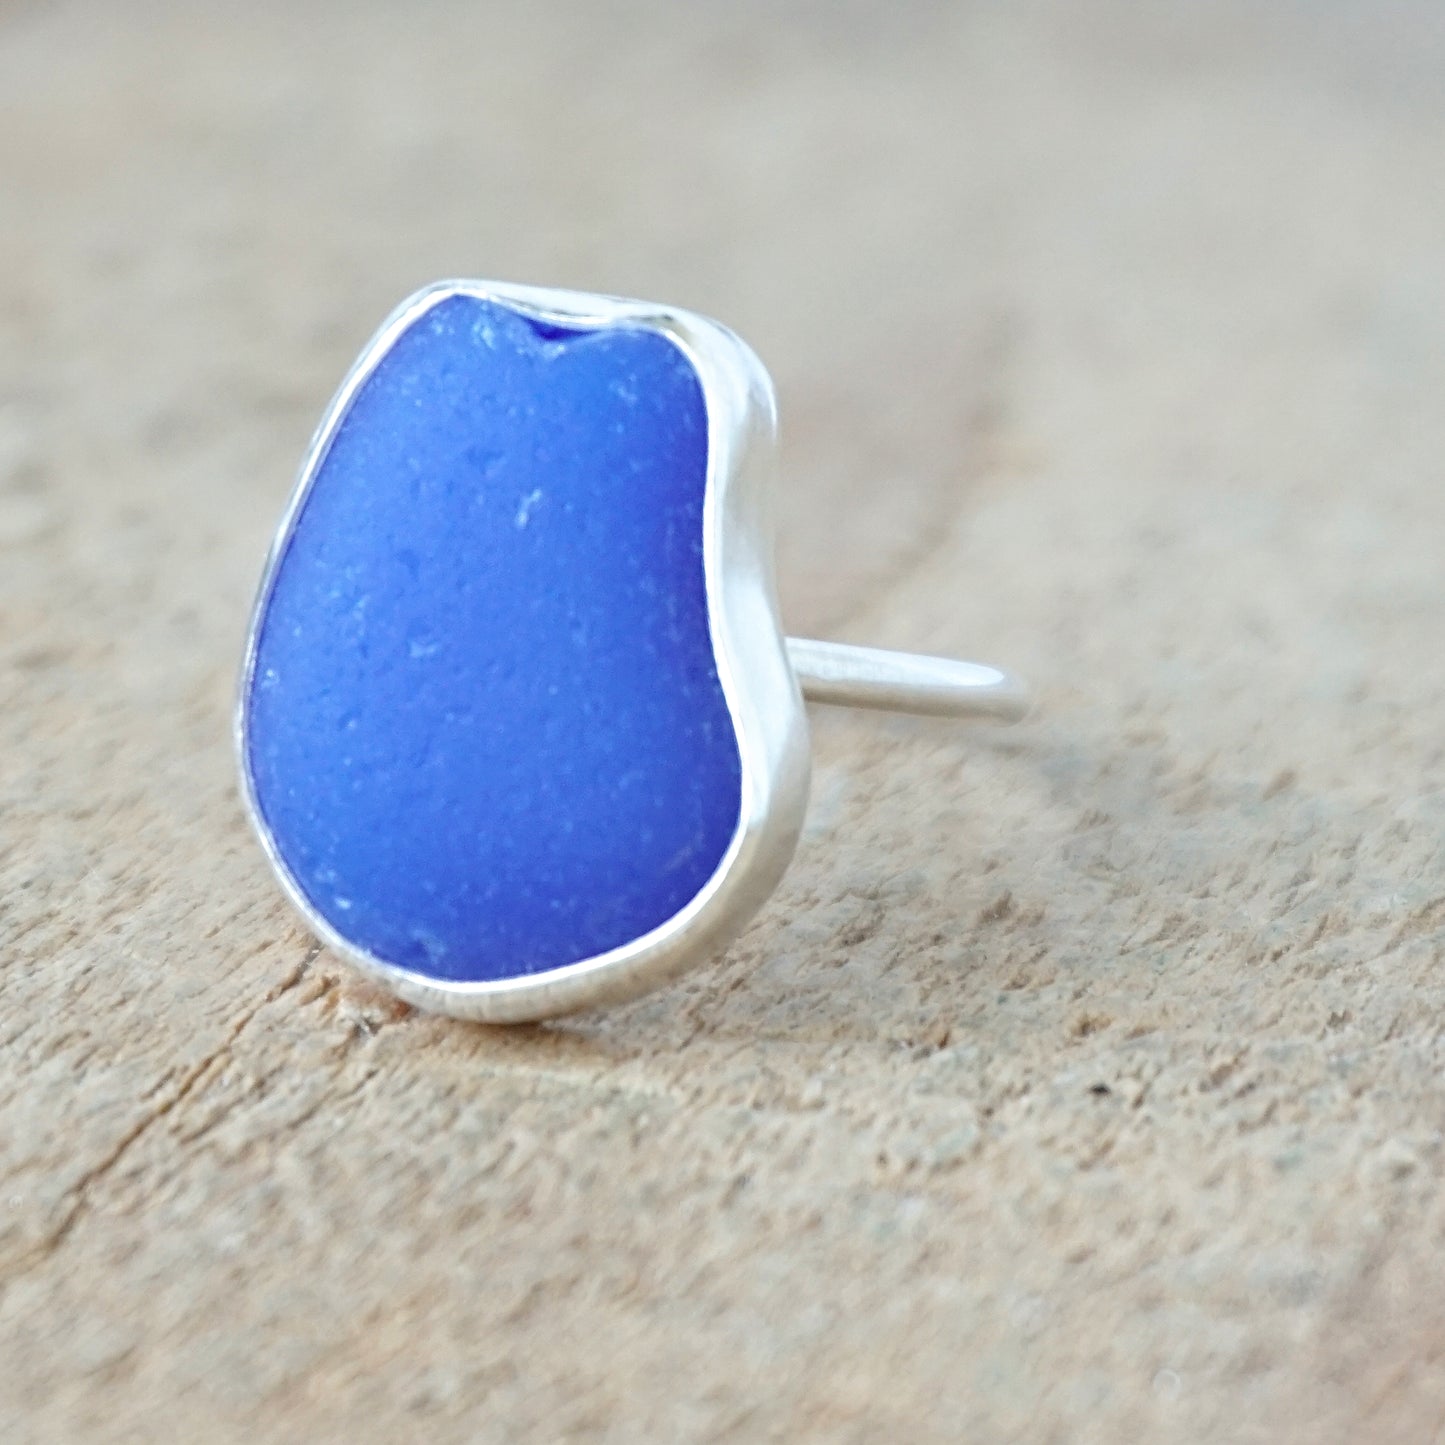 Size 7 1/2 Blue Milk Glass Sea Glass Stacking Ring